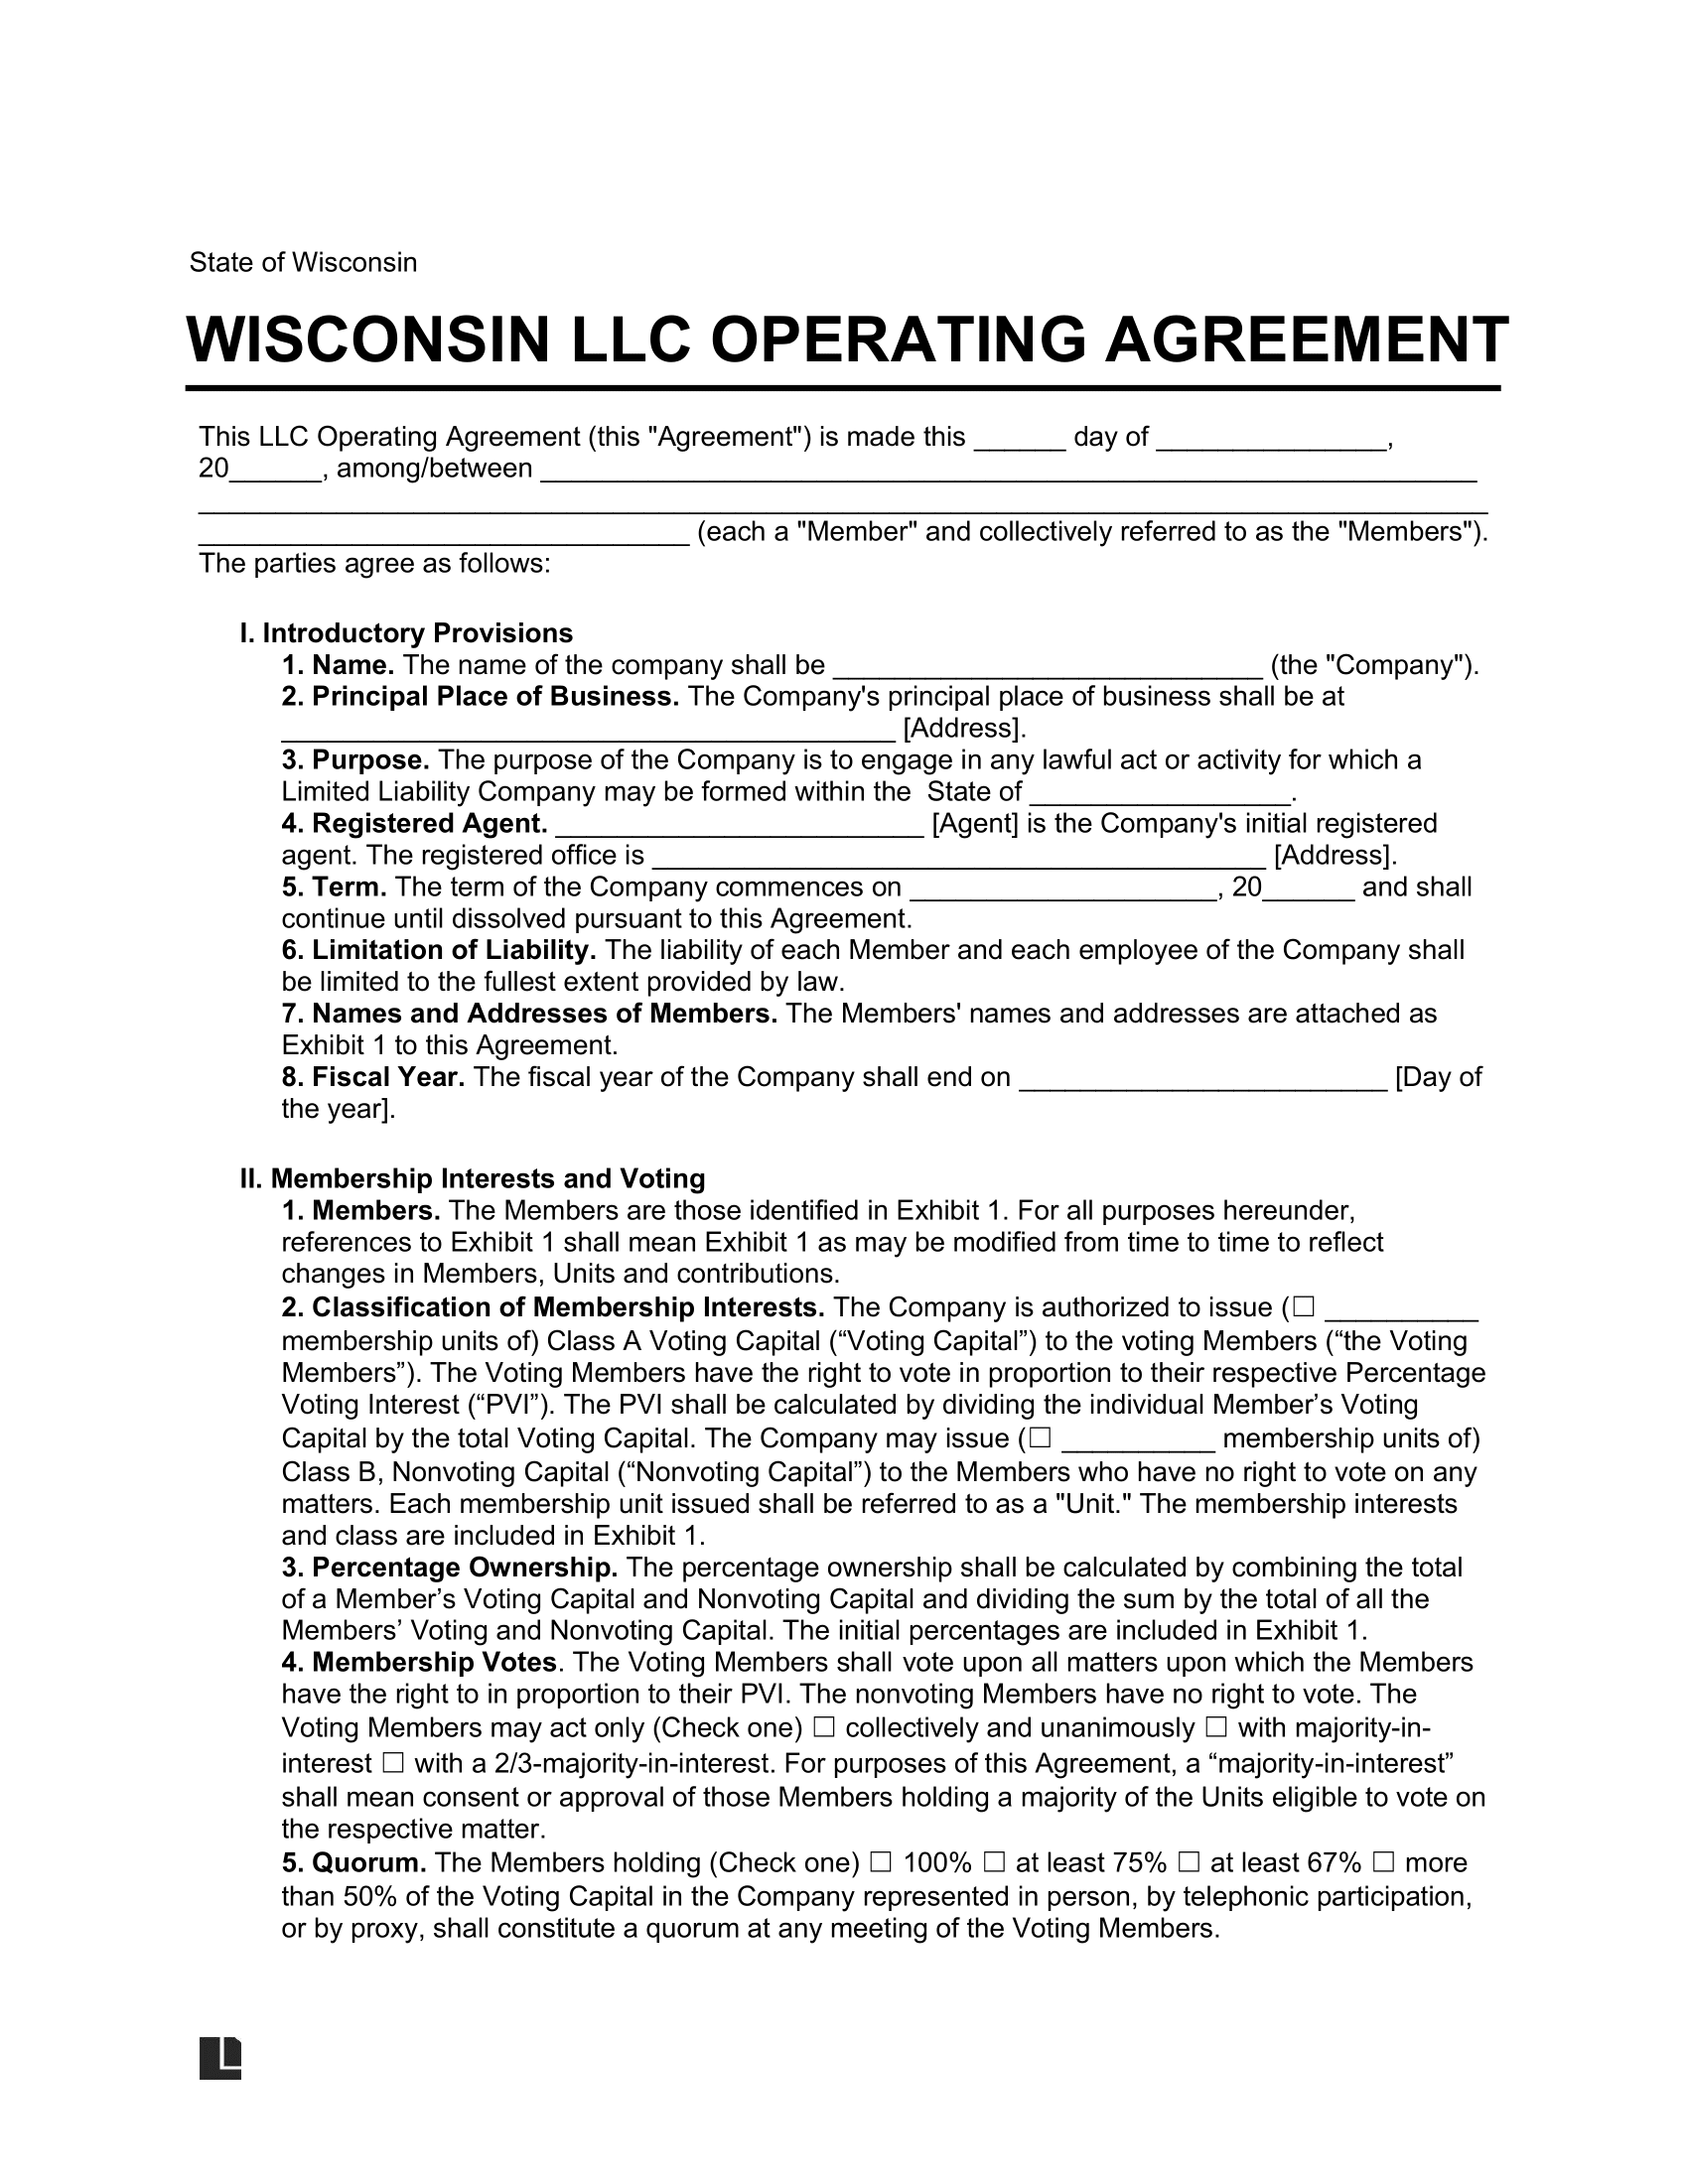 Wisconsin LLC Operating Agreement Template